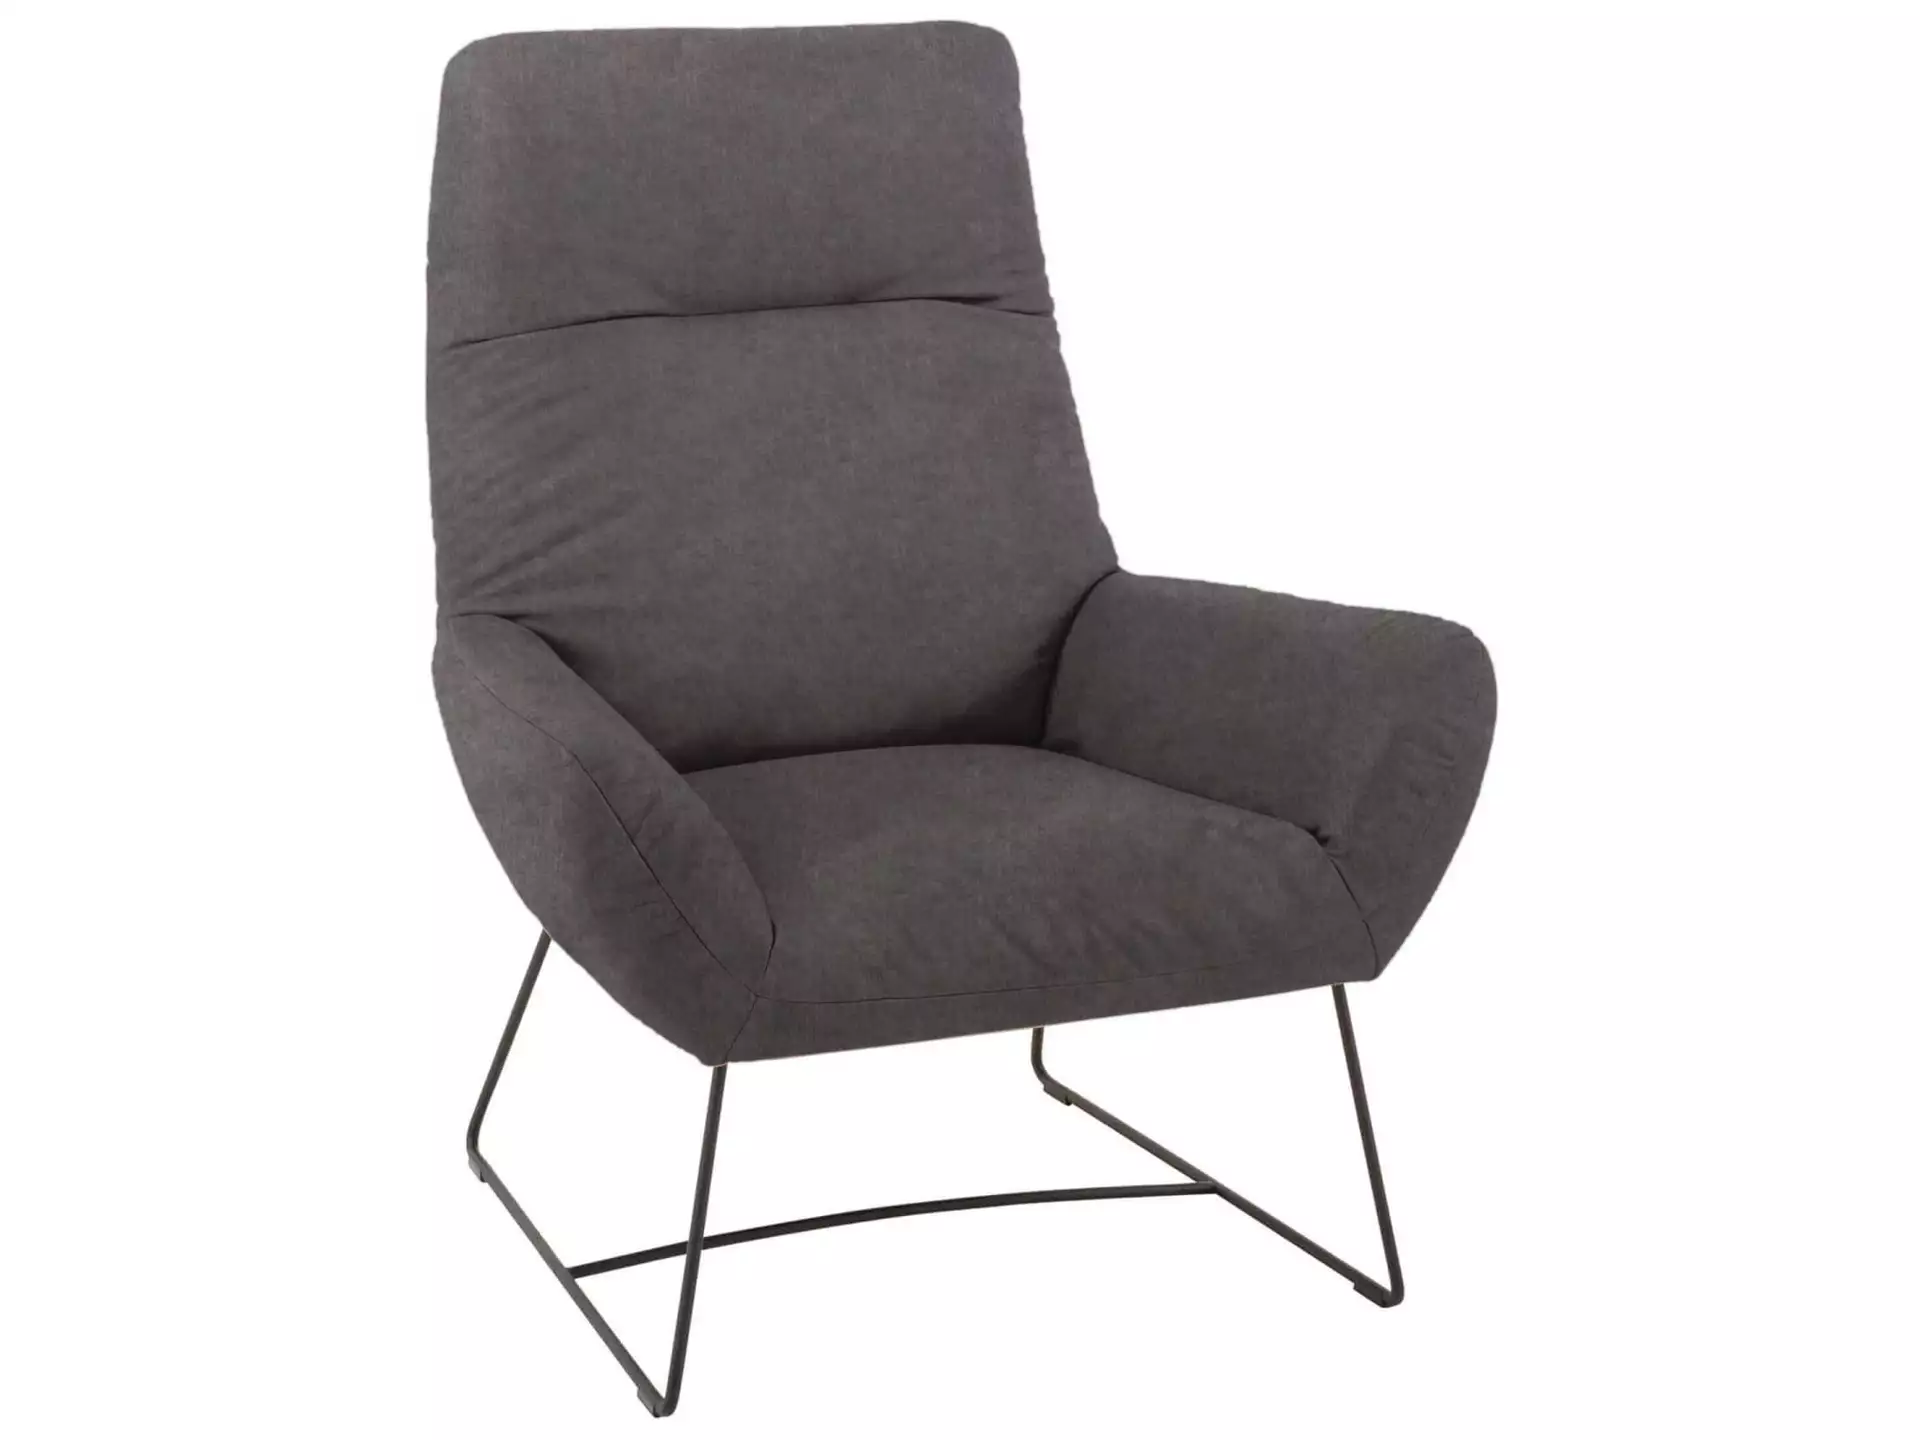 Sessel Berlin Basic Candy / Farbe: Steel / Material: Stoff Basic